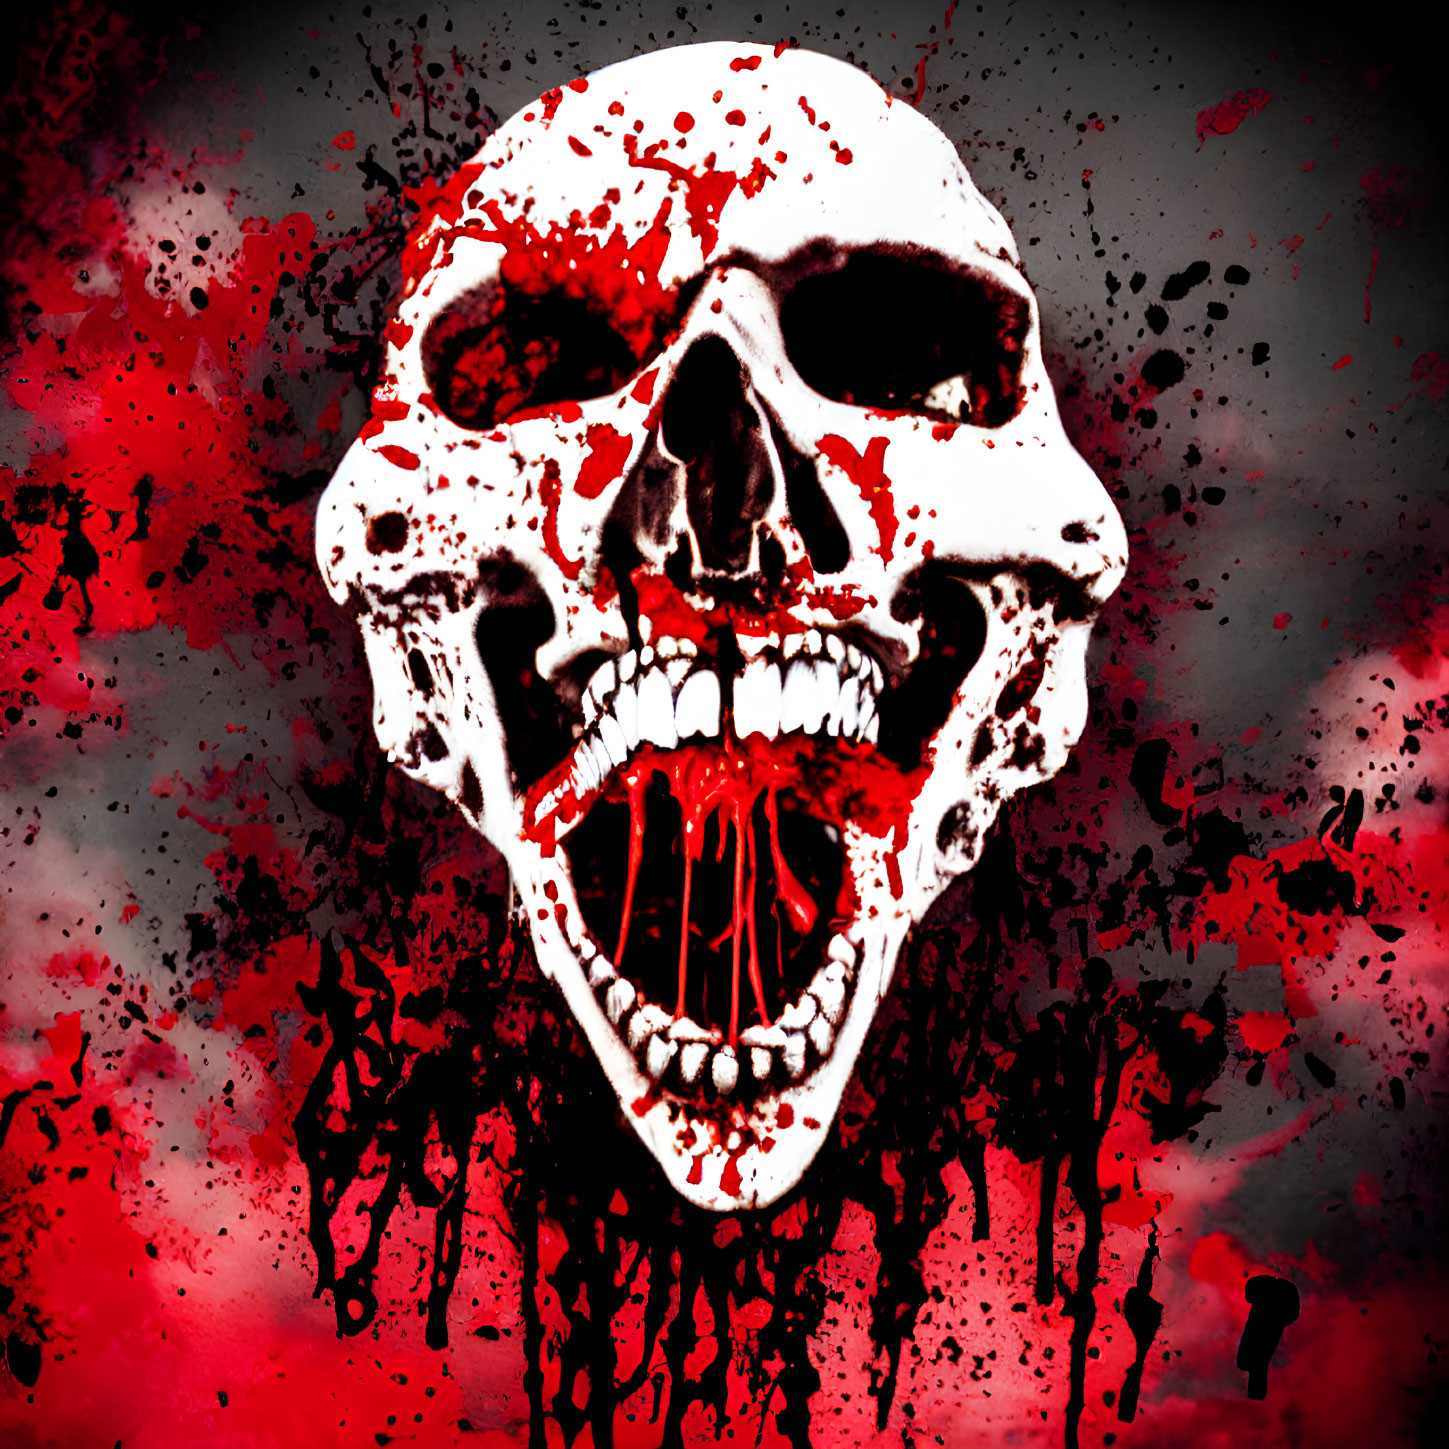 Vivid red and black skull graphic with splattered red effects